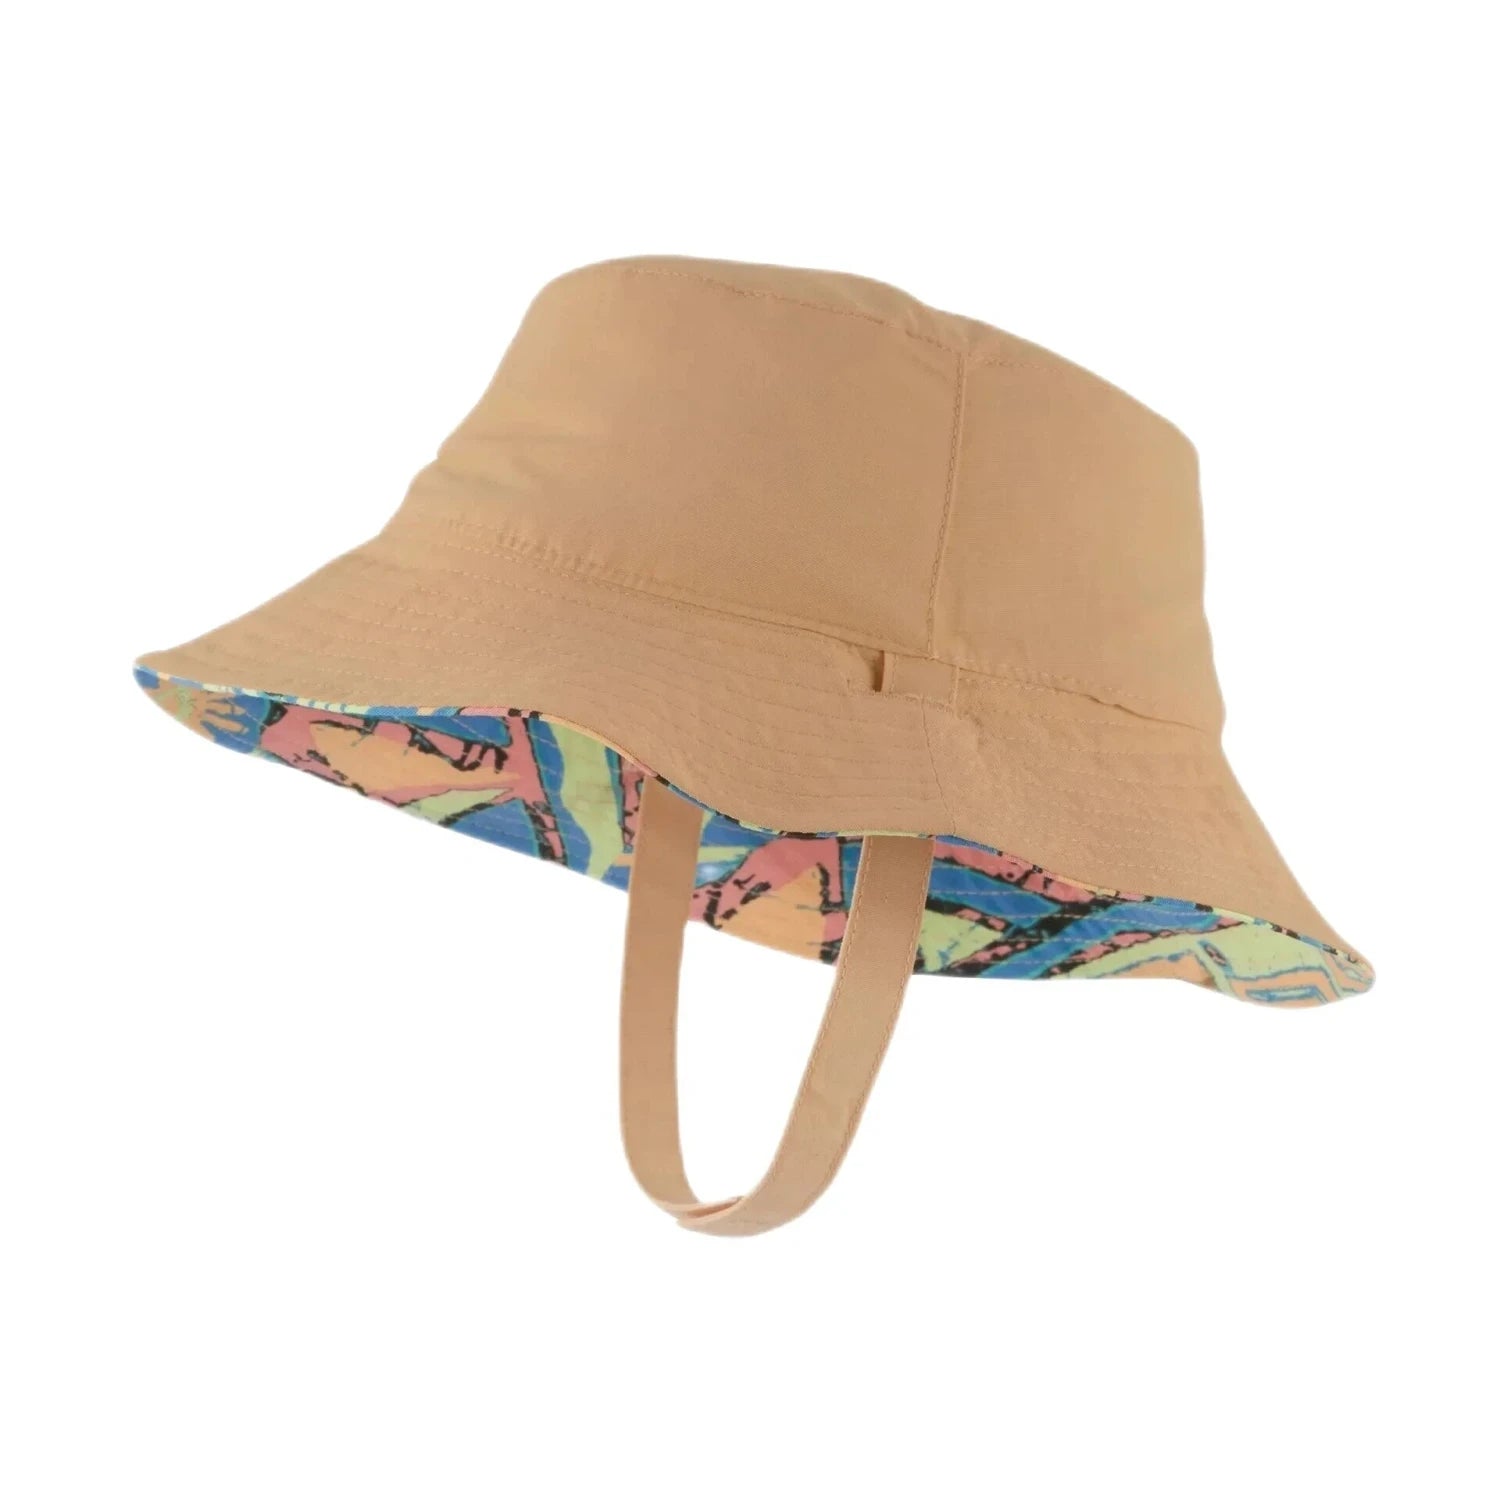 Patagonia Baby Sun Bucket Hat, High Hopes Salamander, inside front and side view